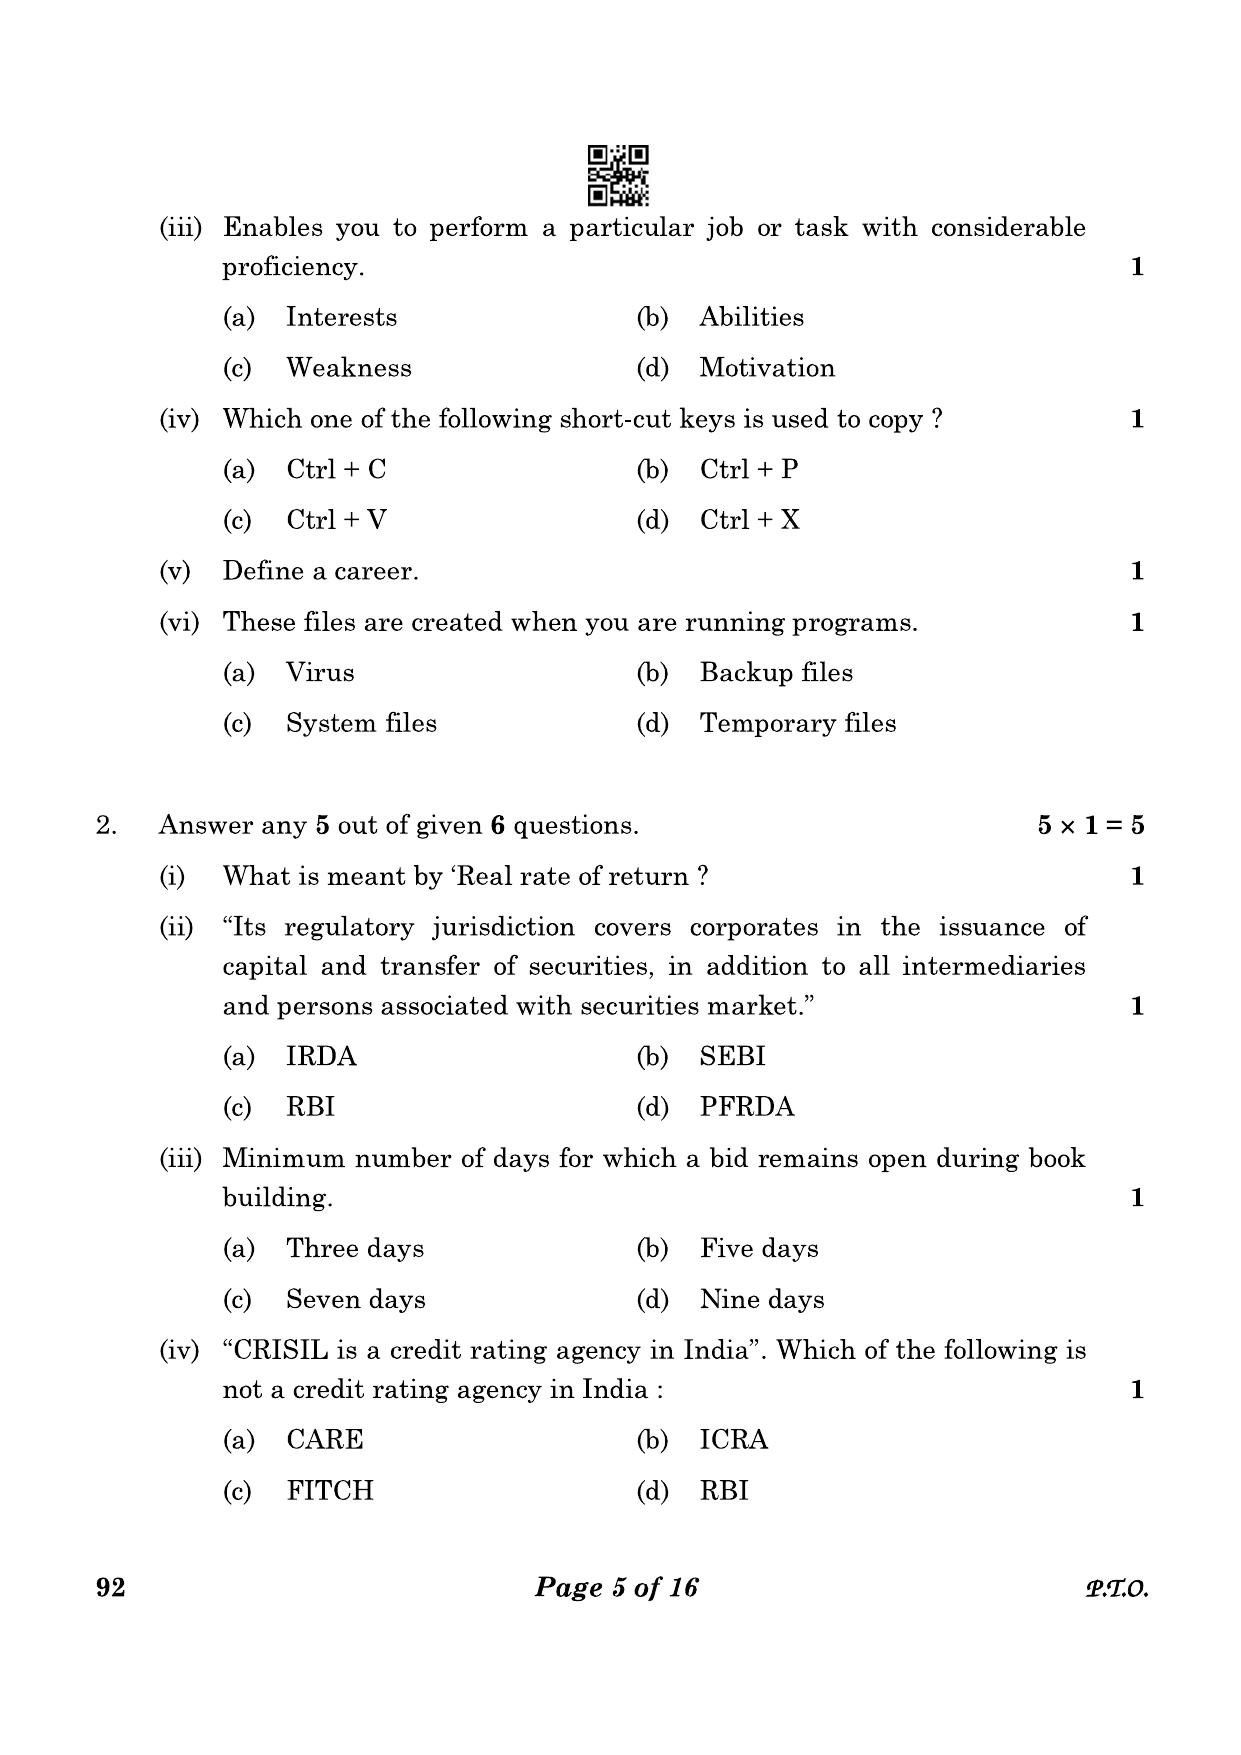 CBSE Class 10 92 Introduction To Financial Markets 2023 Question Paper - Page 5